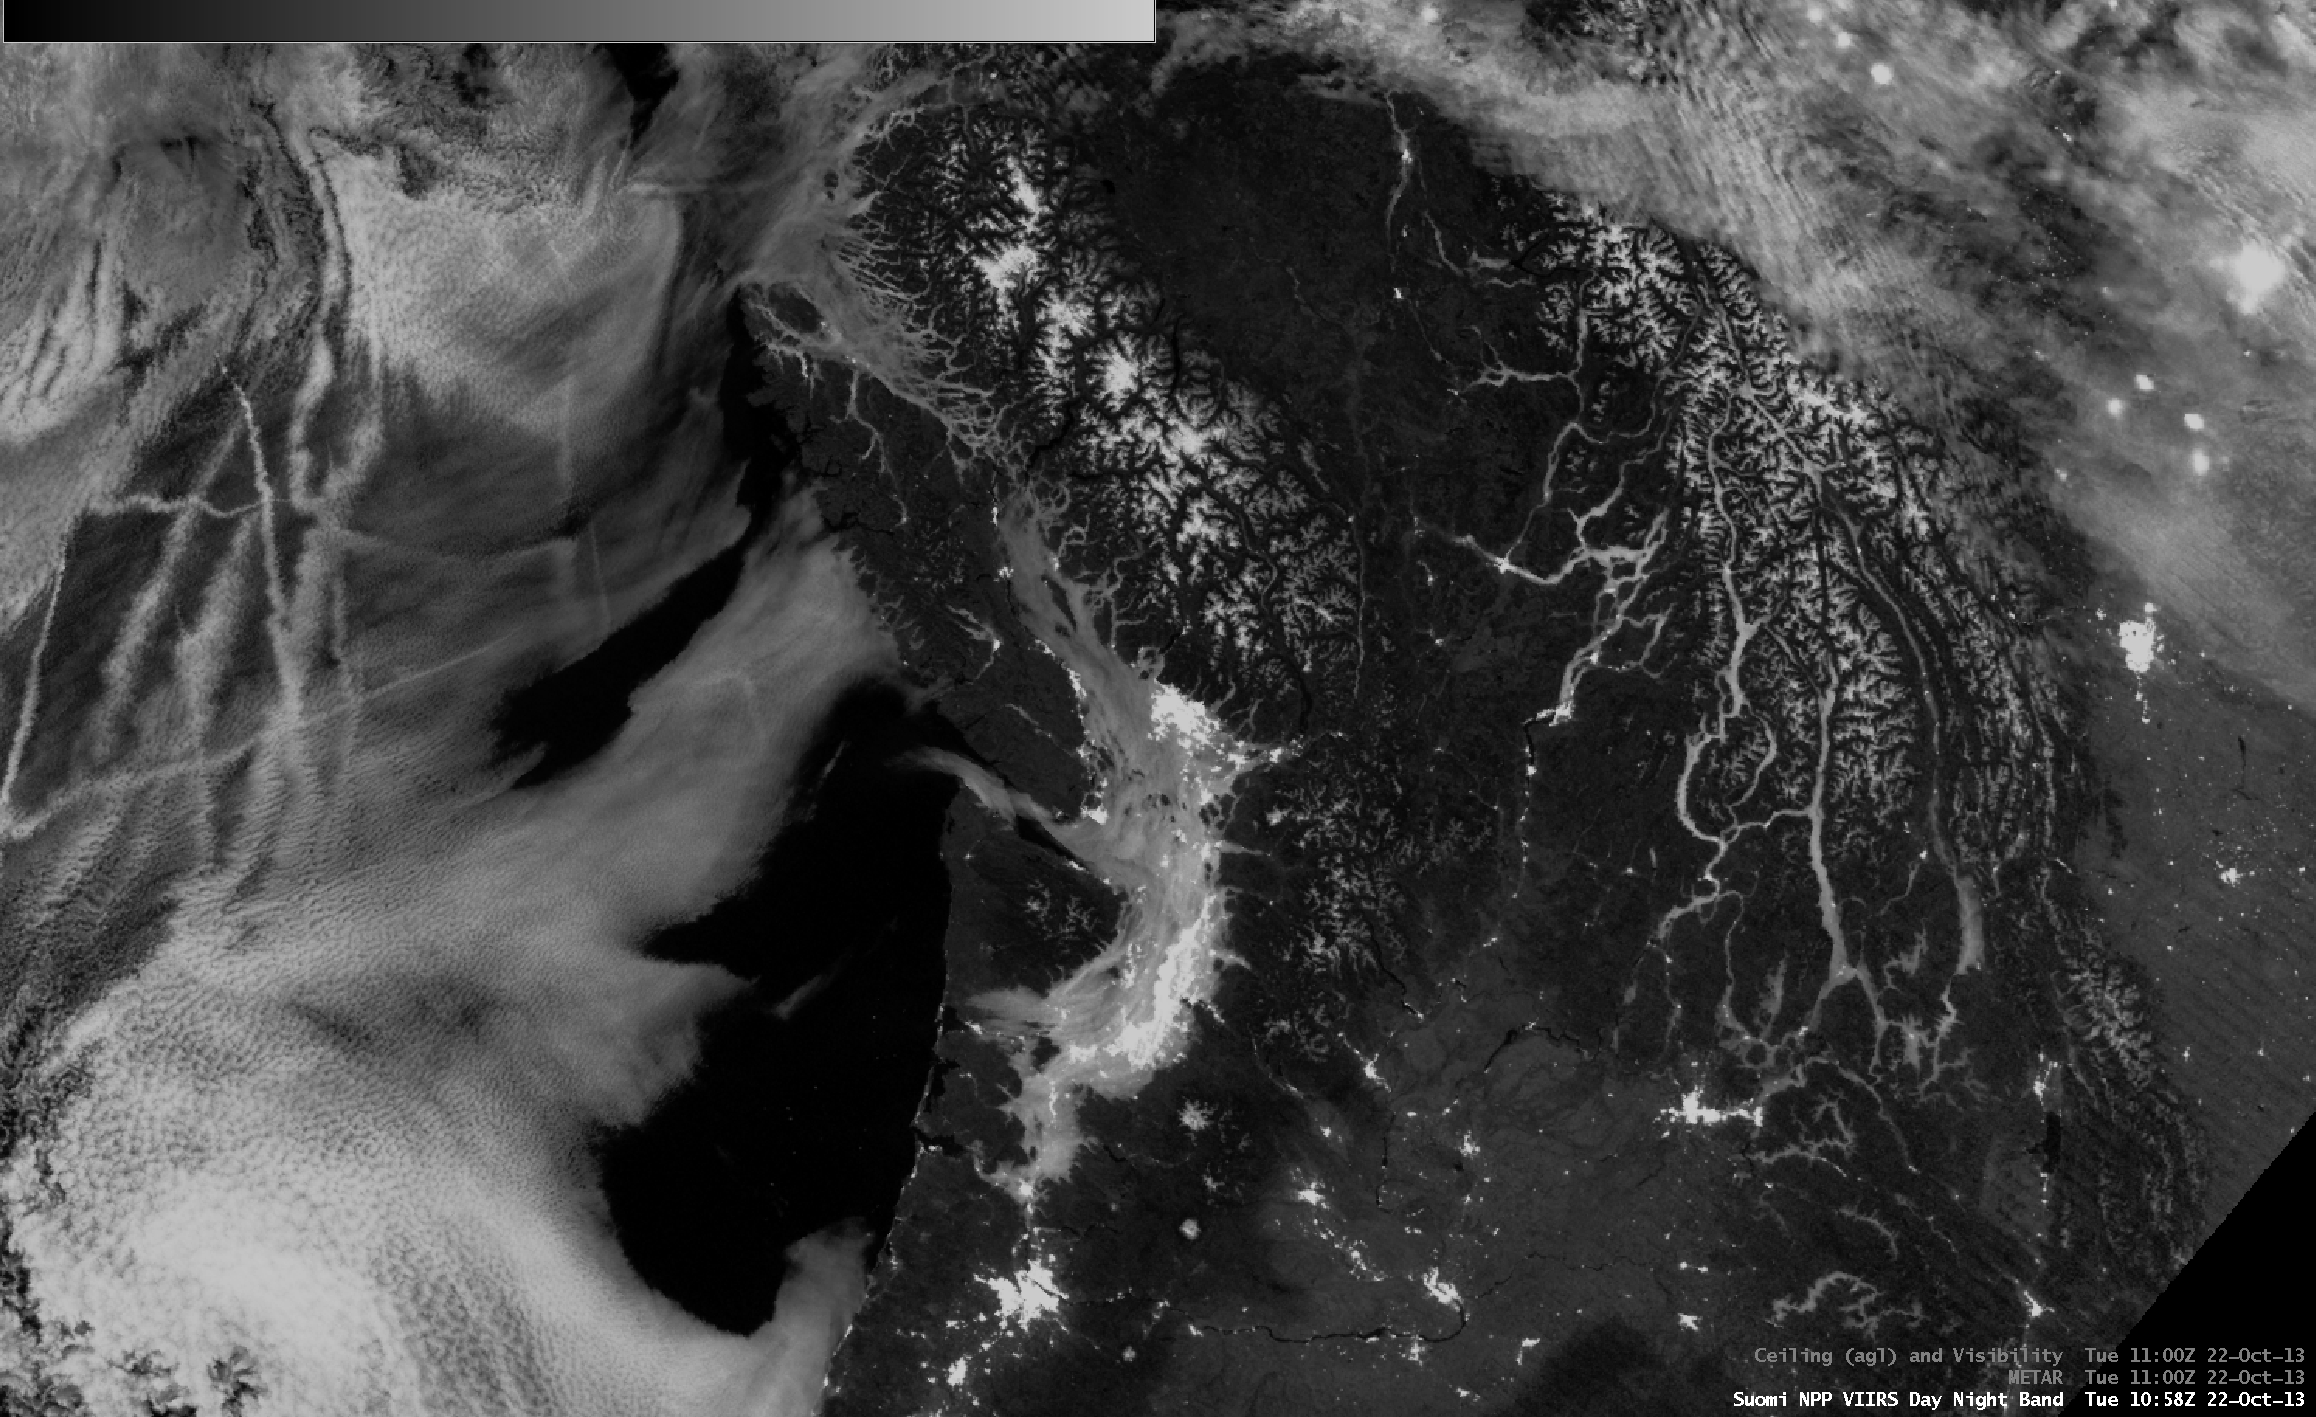 Suomi NPP VIIRS 0.7 um Day/Night Band and IR BTD "Fog/stratus product" images